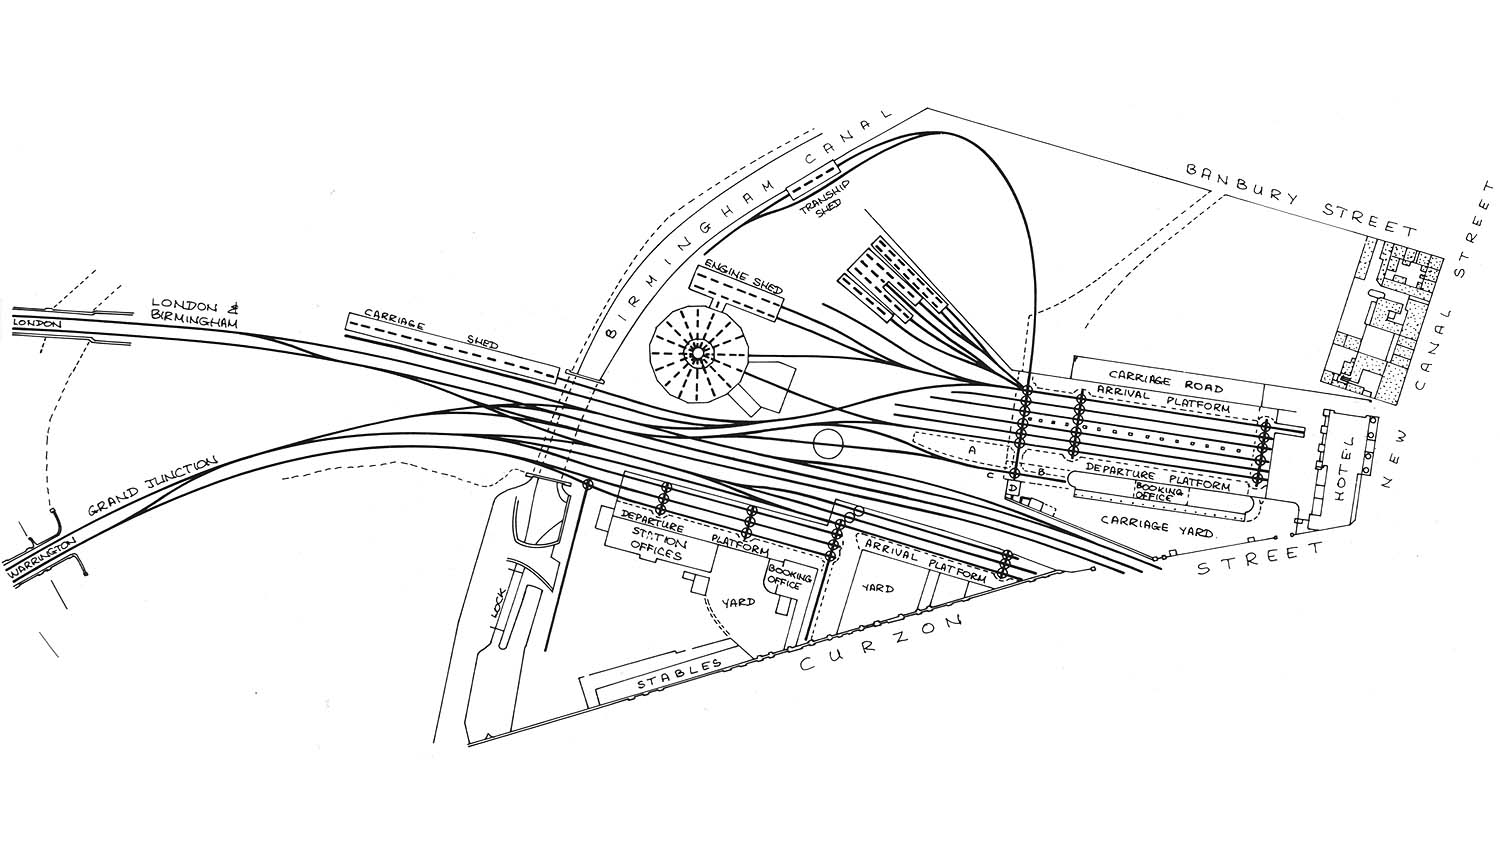 curzon street shed: plan of the approach and layout of